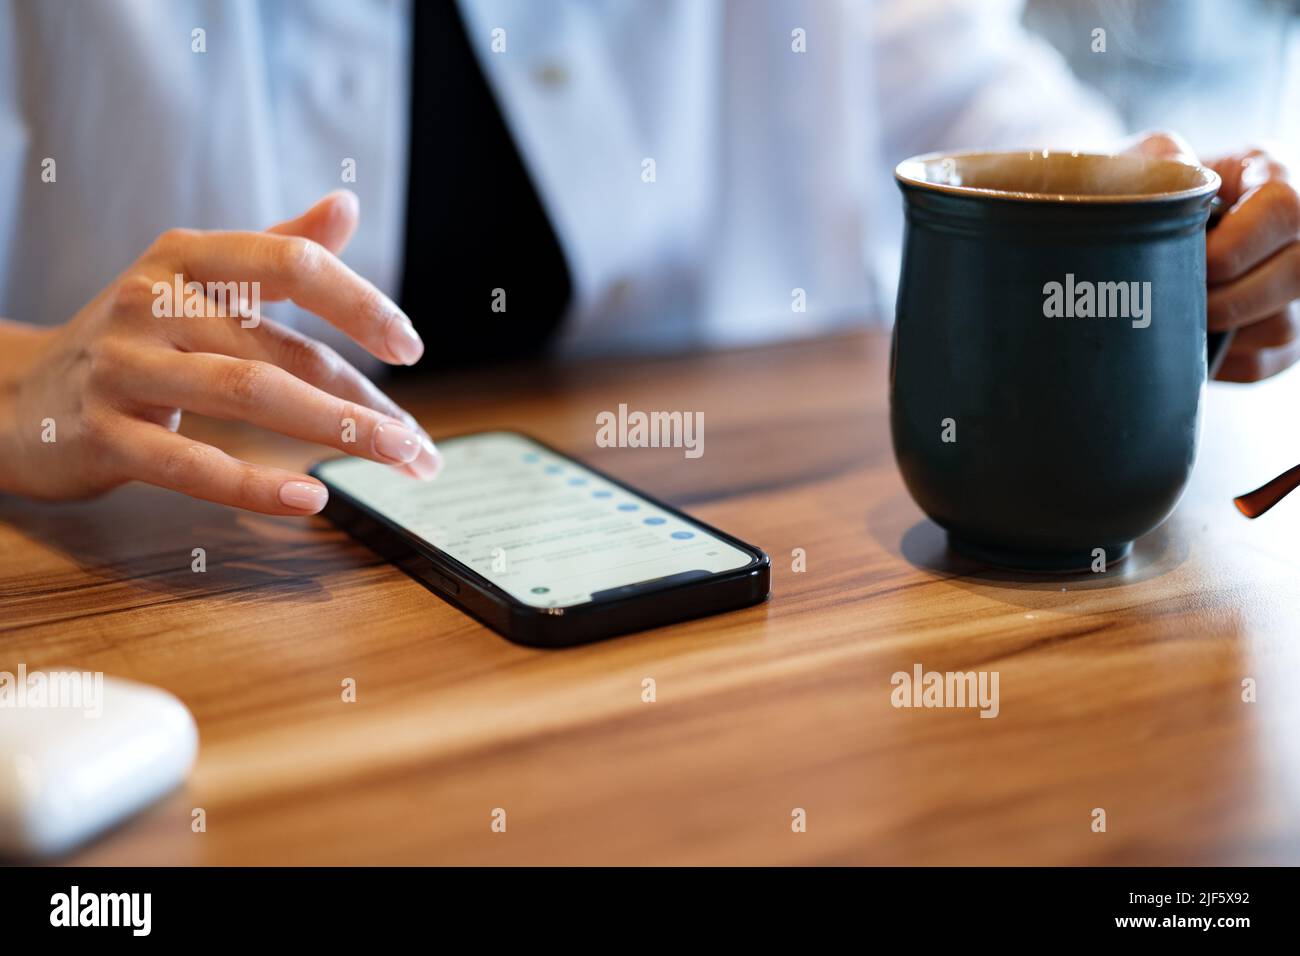 Close up of women's hands holding mobile phone with blank screen in cafe Stock Photo